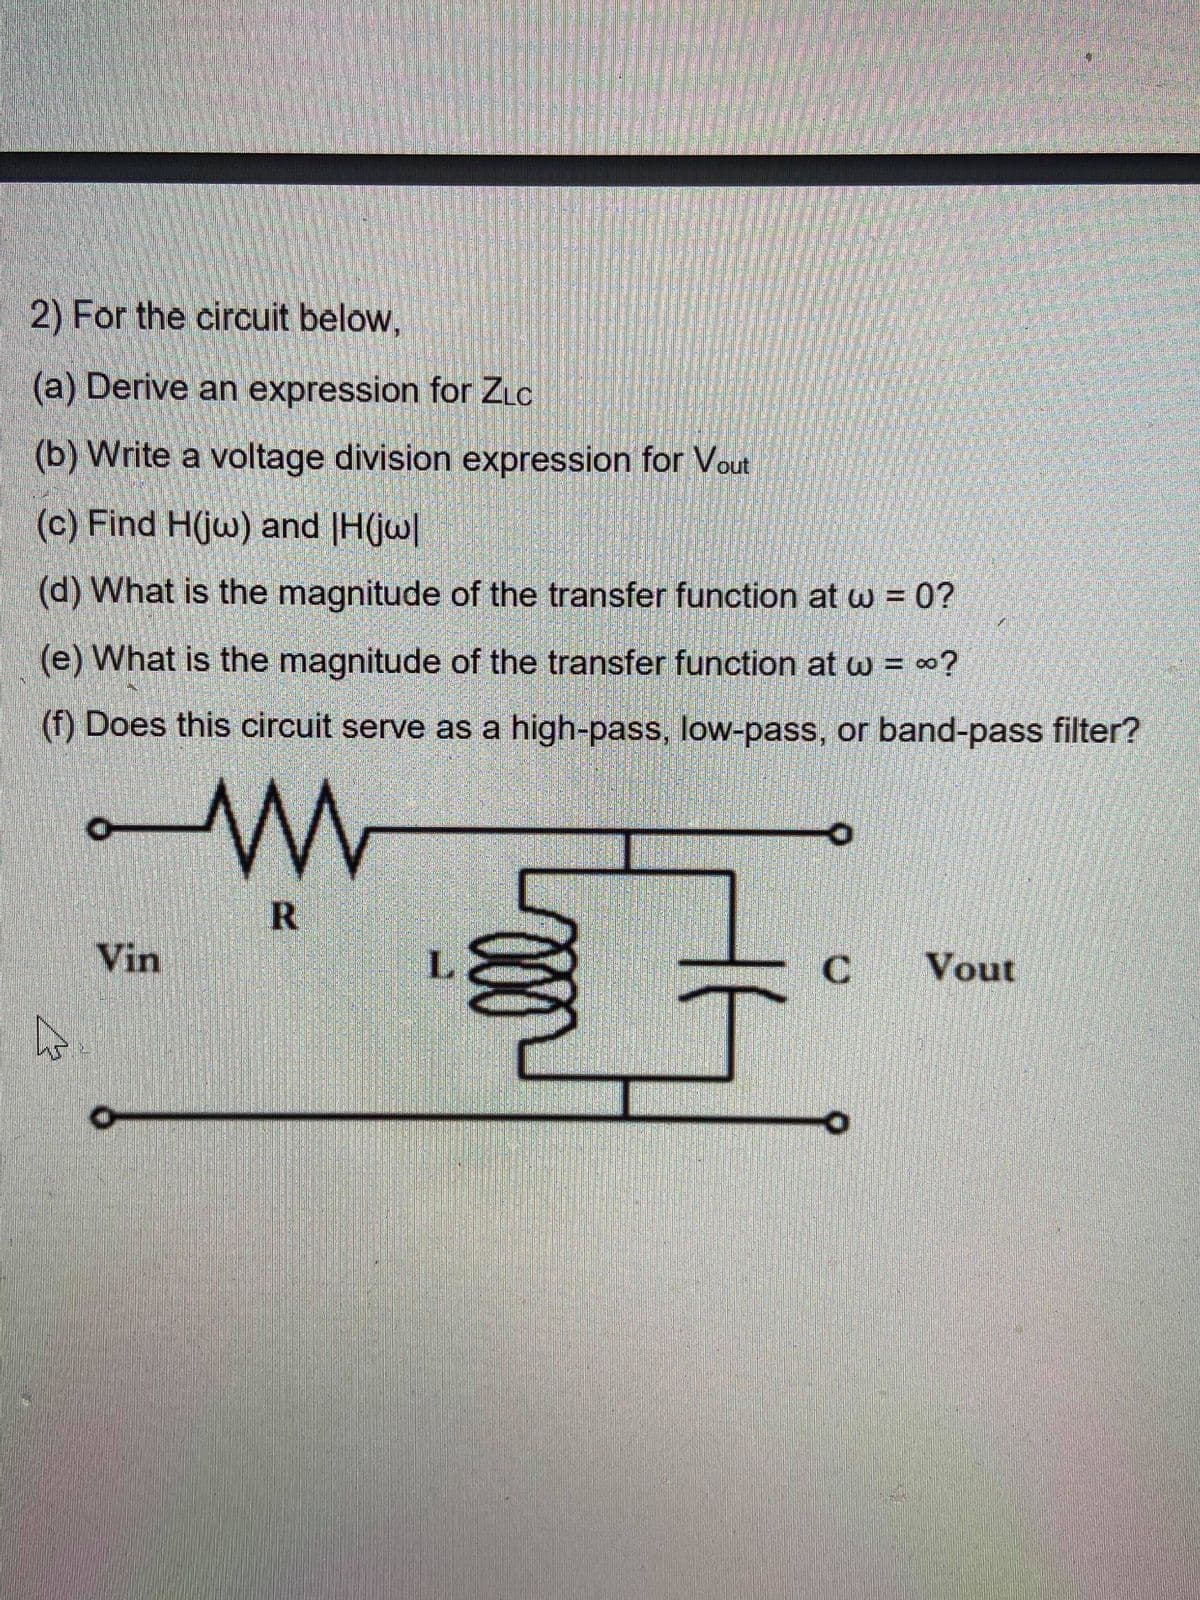 2) For the circuit below,
(a) Derive an expression for ZLC
(b) Write a voltage division expression for Vout
(c) Find H(jw) and |H(jw|
(d) What is the magnitude of the transfer function at w = 0?
(e) What is the magnitude of the transfer function at w = ∞?
(f) Does this circuit serve as a high-pass, low-pass, or band-pass filter?
Vin
L.
Vout
